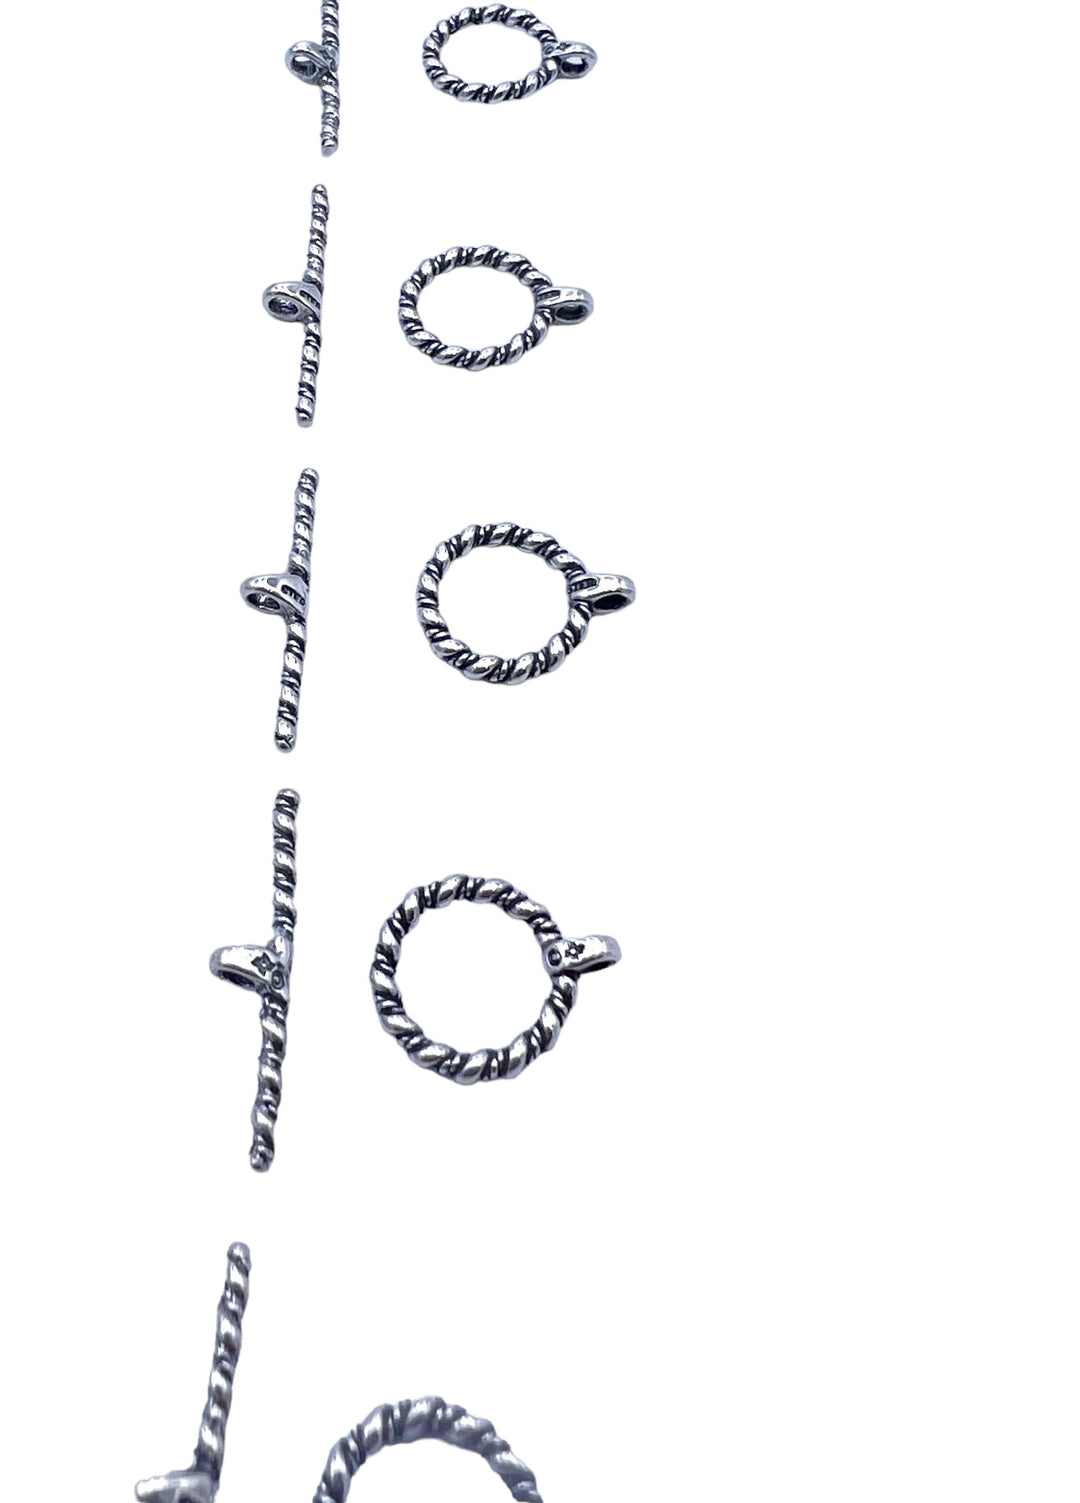 Oxidized Sterling Silver Twisted Toggle Clasp (Pkg of 1 Set)